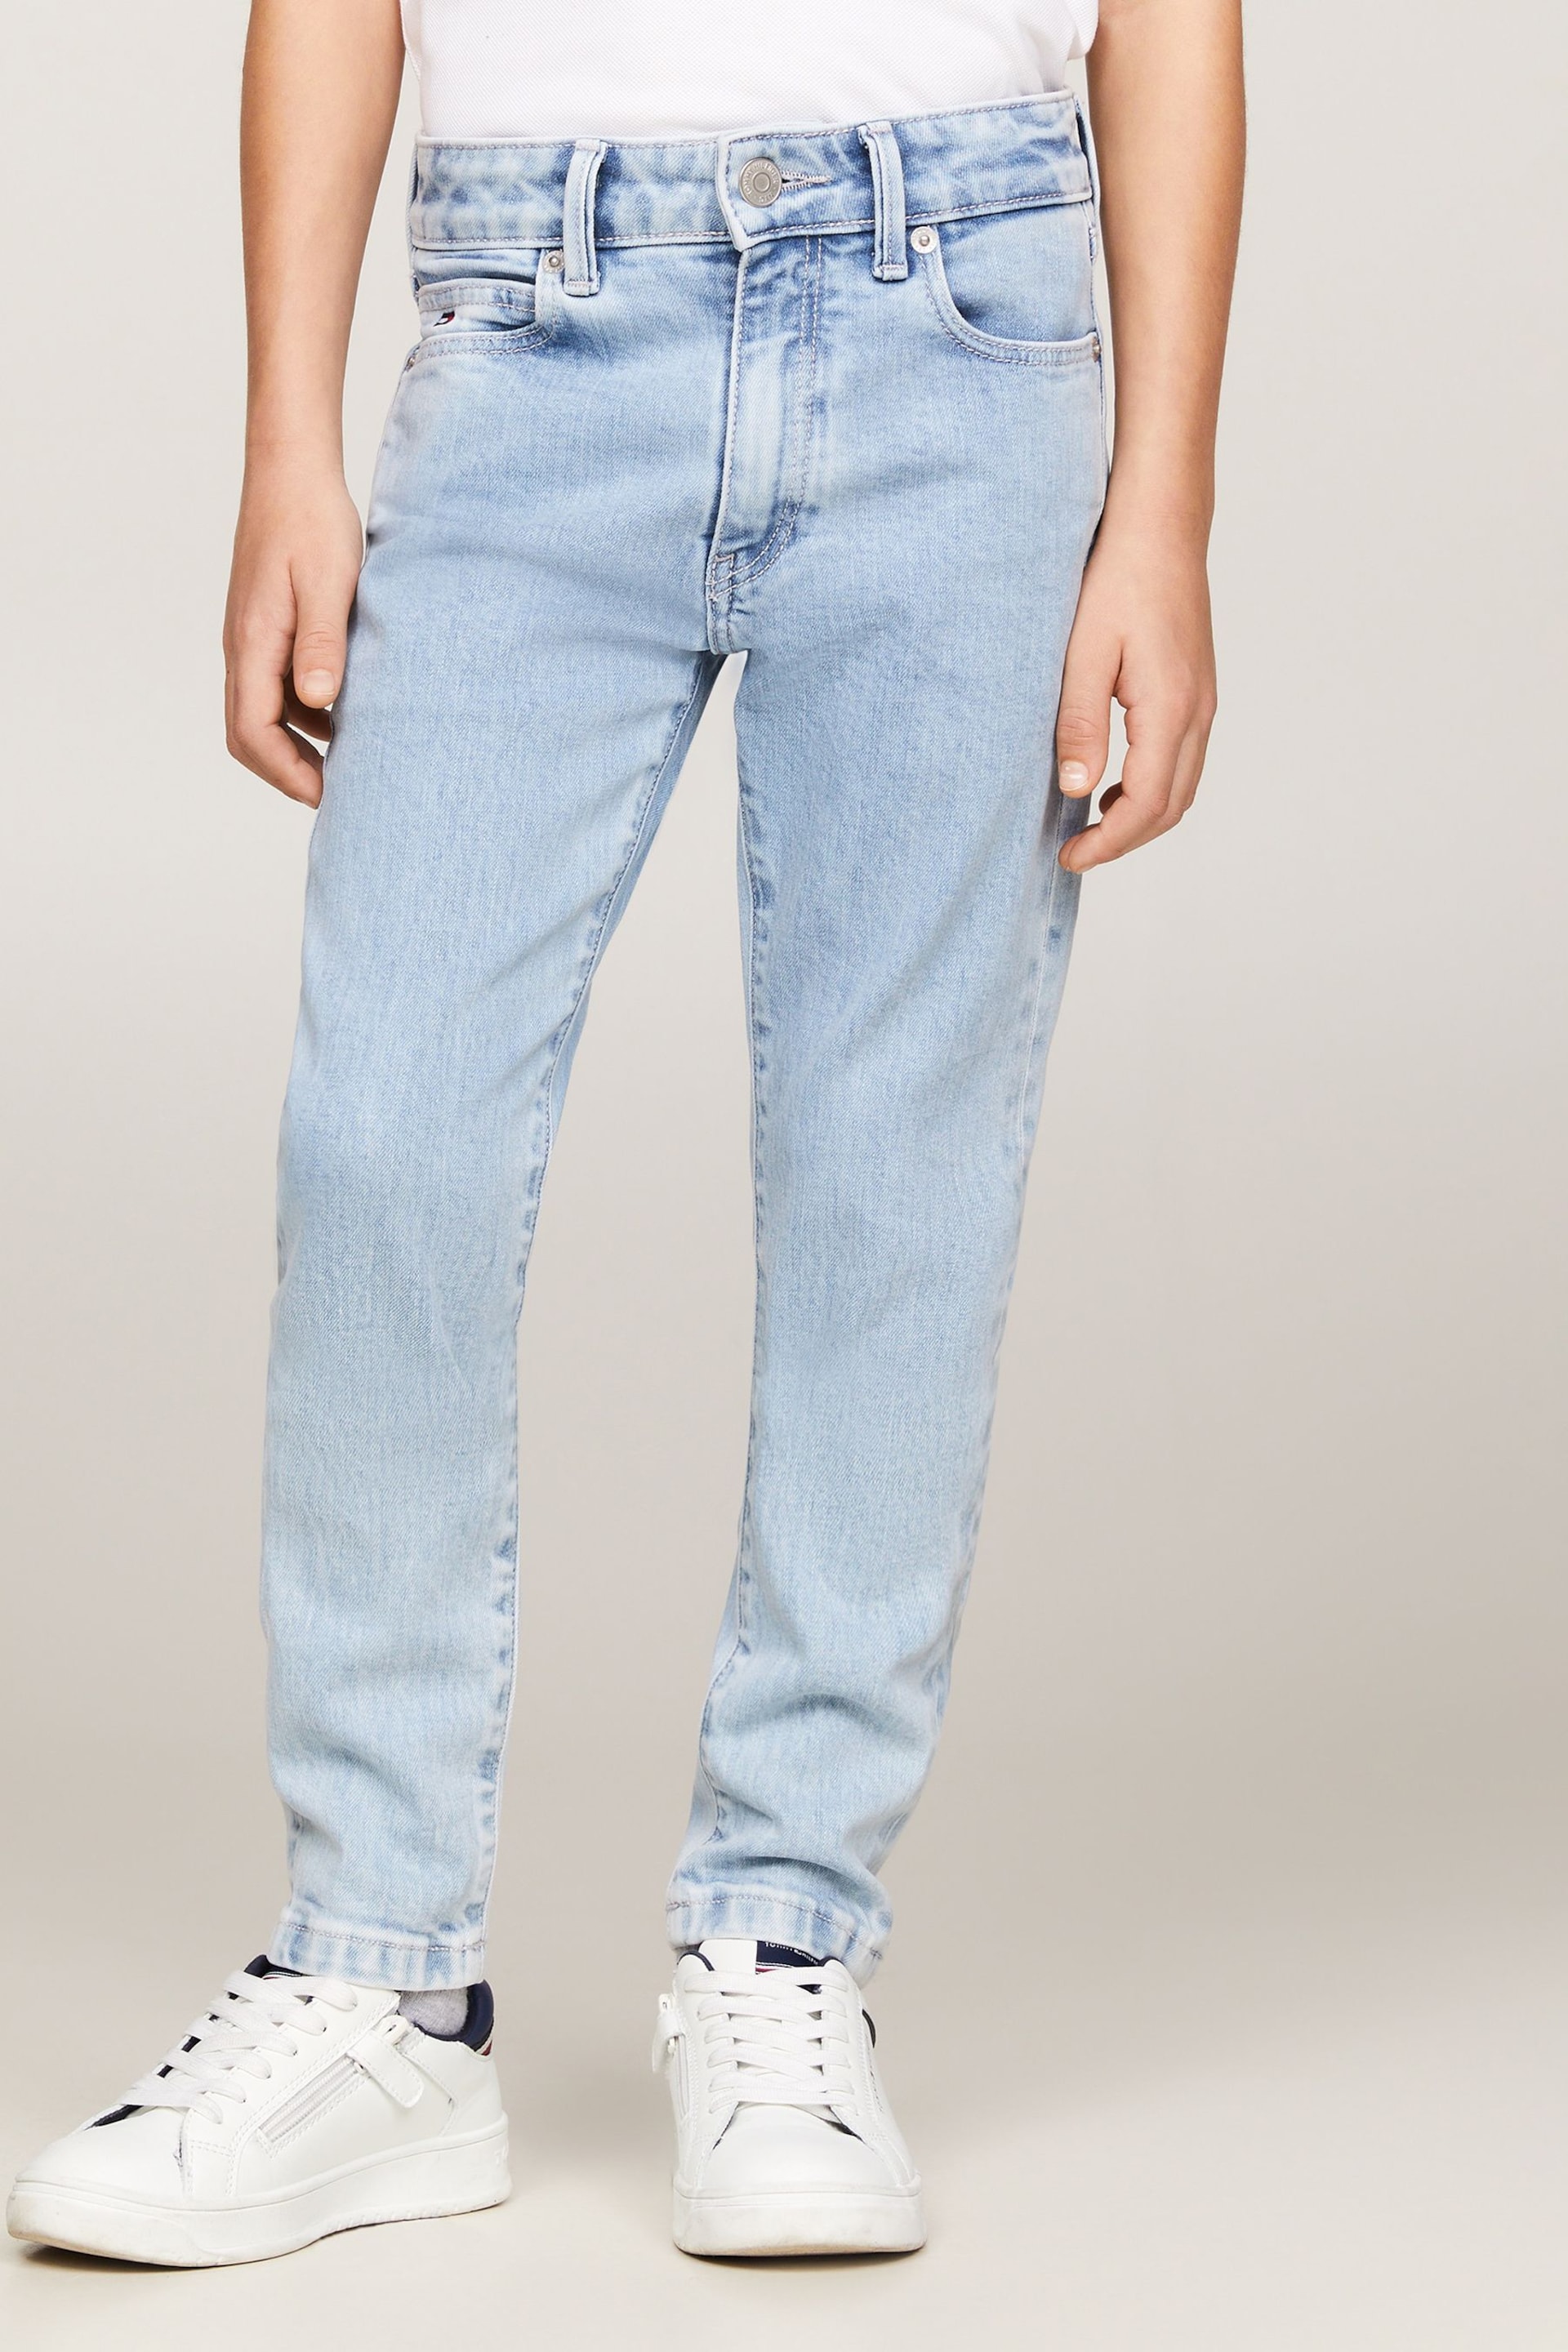 Tommy Hilfiger Blue Modern Straight Jeans - Image 1 of 5